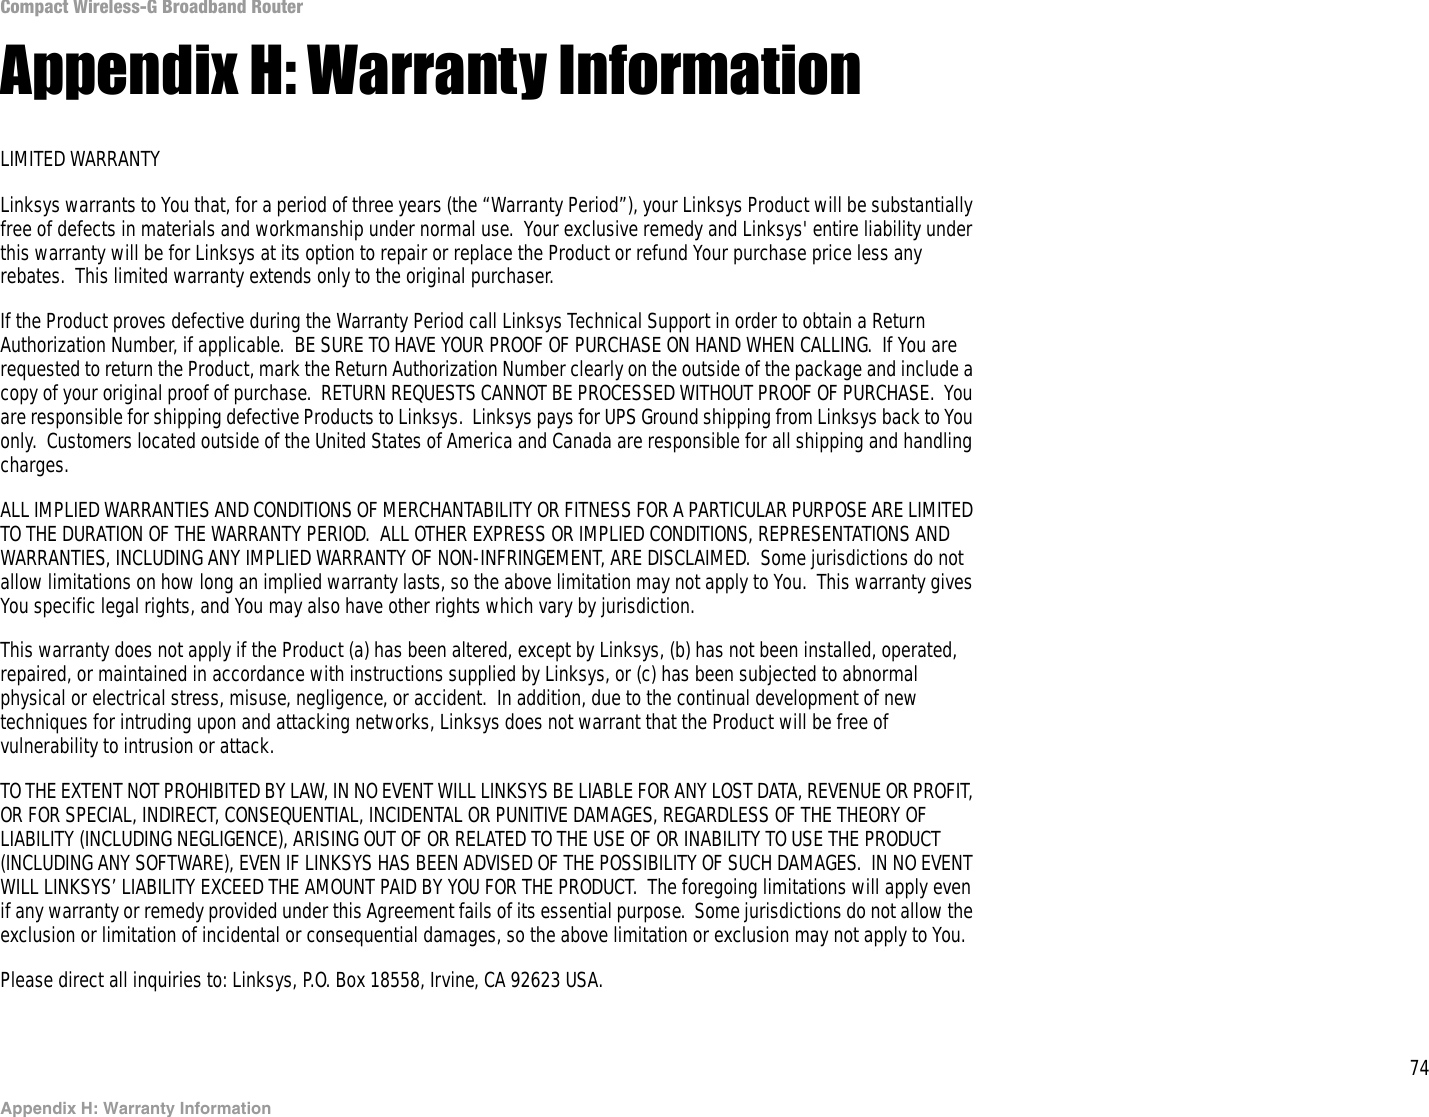 74Appendix H: Warranty InformationCompact Wireless-G Broadband RouterAppendix H: Warranty InformationLIMITED WARRANTYLinksys warrants to You that, for a period of three years (the “Warranty Period”), your Linksys Product will be substantially free of defects in materials and workmanship under normal use.  Your exclusive remedy and Linksys&apos; entire liability under this warranty will be for Linksys at its option to repair or replace the Product or refund Your purchase price less any rebates.  This limited warranty extends only to the original purchaser.  If the Product proves defective during the Warranty Period call Linksys Technical Support in order to obtain a Return Authorization Number, if applicable.  BE SURE TO HAVE YOUR PROOF OF PURCHASE ON HAND WHEN CALLING.  If You are requested to return the Product, mark the Return Authorization Number clearly on the outside of the package and include a copy of your original proof of purchase.  RETURN REQUESTS CANNOT BE PROCESSED WITHOUT PROOF OF PURCHASE.  You are responsible for shipping defective Products to Linksys.  Linksys pays for UPS Ground shipping from Linksys back to You only.  Customers located outside of the United States of America and Canada are responsible for all shipping and handling charges. ALL IMPLIED WARRANTIES AND CONDITIONS OF MERCHANTABILITY OR FITNESS FOR A PARTICULAR PURPOSE ARE LIMITED TO THE DURATION OF THE WARRANTY PERIOD.  ALL OTHER EXPRESS OR IMPLIED CONDITIONS, REPRESENTATIONS AND WARRANTIES, INCLUDING ANY IMPLIED WARRANTY OF NON-INFRINGEMENT, ARE DISCLAIMED.  Some jurisdictions do not allow limitations on how long an implied warranty lasts, so the above limitation may not apply to You.  This warranty gives You specific legal rights, and You may also have other rights which vary by jurisdiction.This warranty does not apply if the Product (a) has been altered, except by Linksys, (b) has not been installed, operated, repaired, or maintained in accordance with instructions supplied by Linksys, or (c) has been subjected to abnormal physical or electrical stress, misuse, negligence, or accident.  In addition, due to the continual development of new techniques for intruding upon and attacking networks, Linksys does not warrant that the Product will be free of vulnerability to intrusion or attack.TO THE EXTENT NOT PROHIBITED BY LAW, IN NO EVENT WILL LINKSYS BE LIABLE FOR ANY LOST DATA, REVENUE OR PROFIT, OR FOR SPECIAL, INDIRECT, CONSEQUENTIAL, INCIDENTAL OR PUNITIVE DAMAGES, REGARDLESS OF THE THEORY OF LIABILITY (INCLUDING NEGLIGENCE), ARISING OUT OF OR RELATED TO THE USE OF OR INABILITY TO USE THE PRODUCT (INCLUDING ANY SOFTWARE), EVEN IF LINKSYS HAS BEEN ADVISED OF THE POSSIBILITY OF SUCH DAMAGES.  IN NO EVENT WILL LINKSYS’ LIABILITY EXCEED THE AMOUNT PAID BY YOU FOR THE PRODUCT.  The foregoing limitations will apply even if any warranty or remedy provided under this Agreement fails of its essential purpose.  Some jurisdictions do not allow the exclusion or limitation of incidental or consequential damages, so the above limitation or exclusion may not apply to You.Please direct all inquiries to: Linksys, P.O. Box 18558, Irvine, CA 92623 USA.